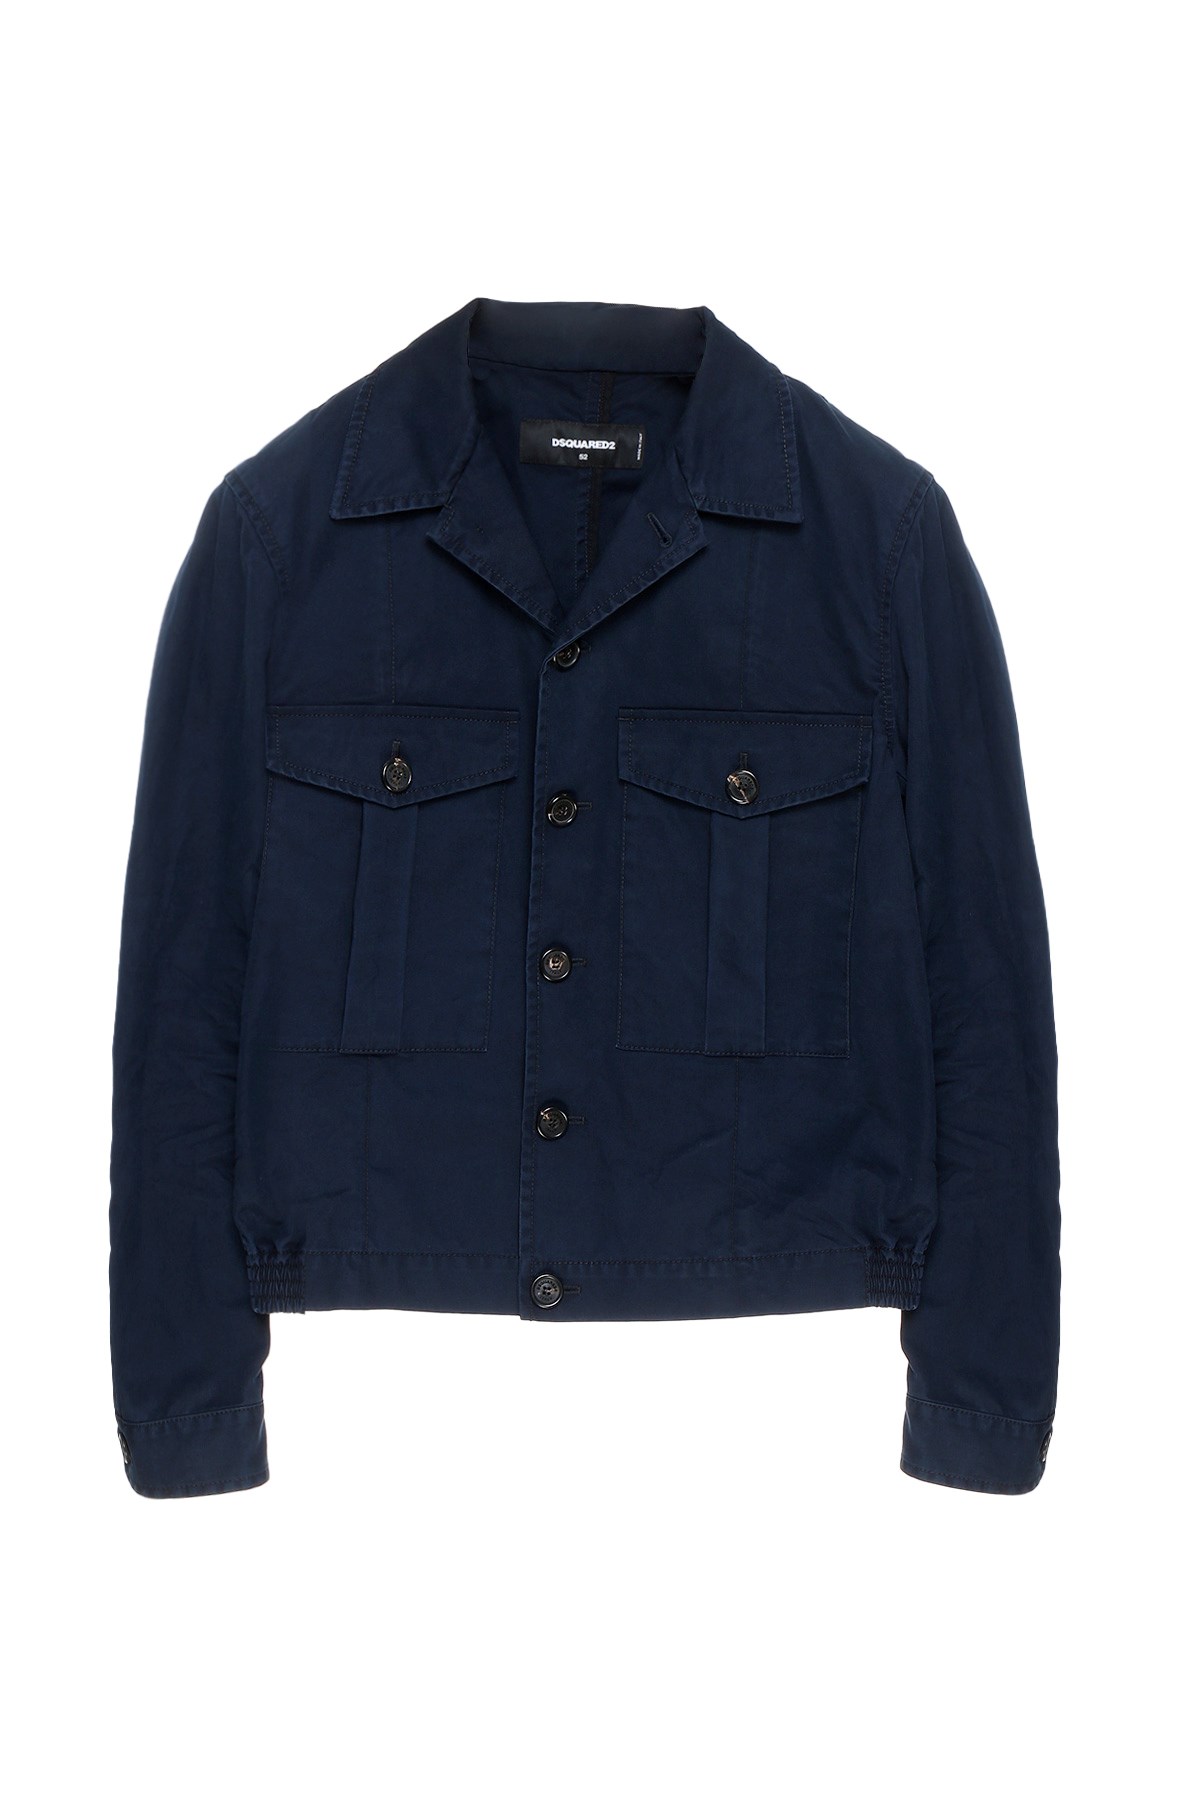 DSQUARED2 Applicated Pockets Jacket